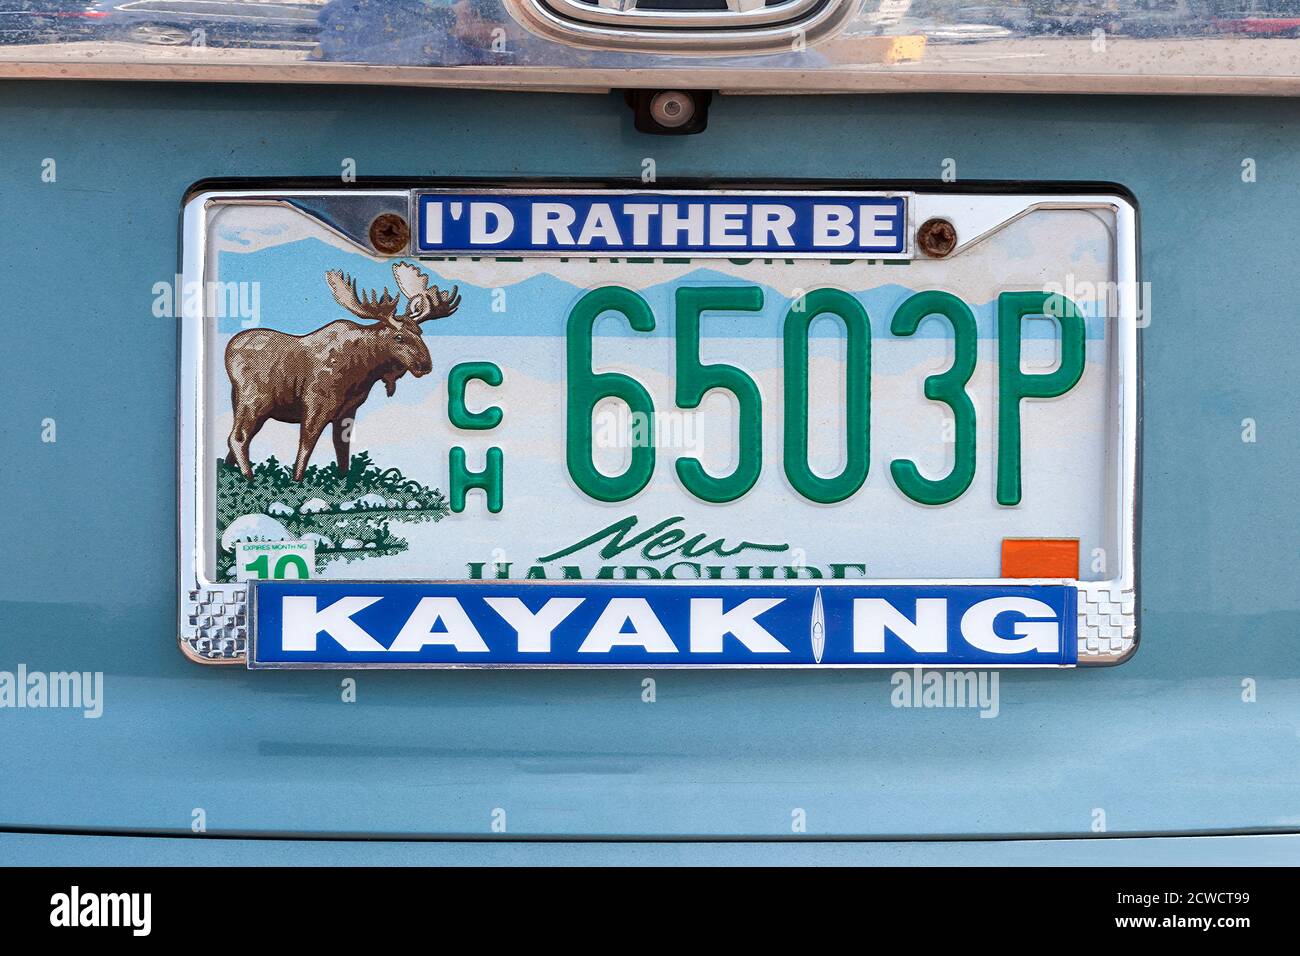 'I'd Rather Be Kayaking' vanity license plate in New Hampshire, USA. Stock Photo